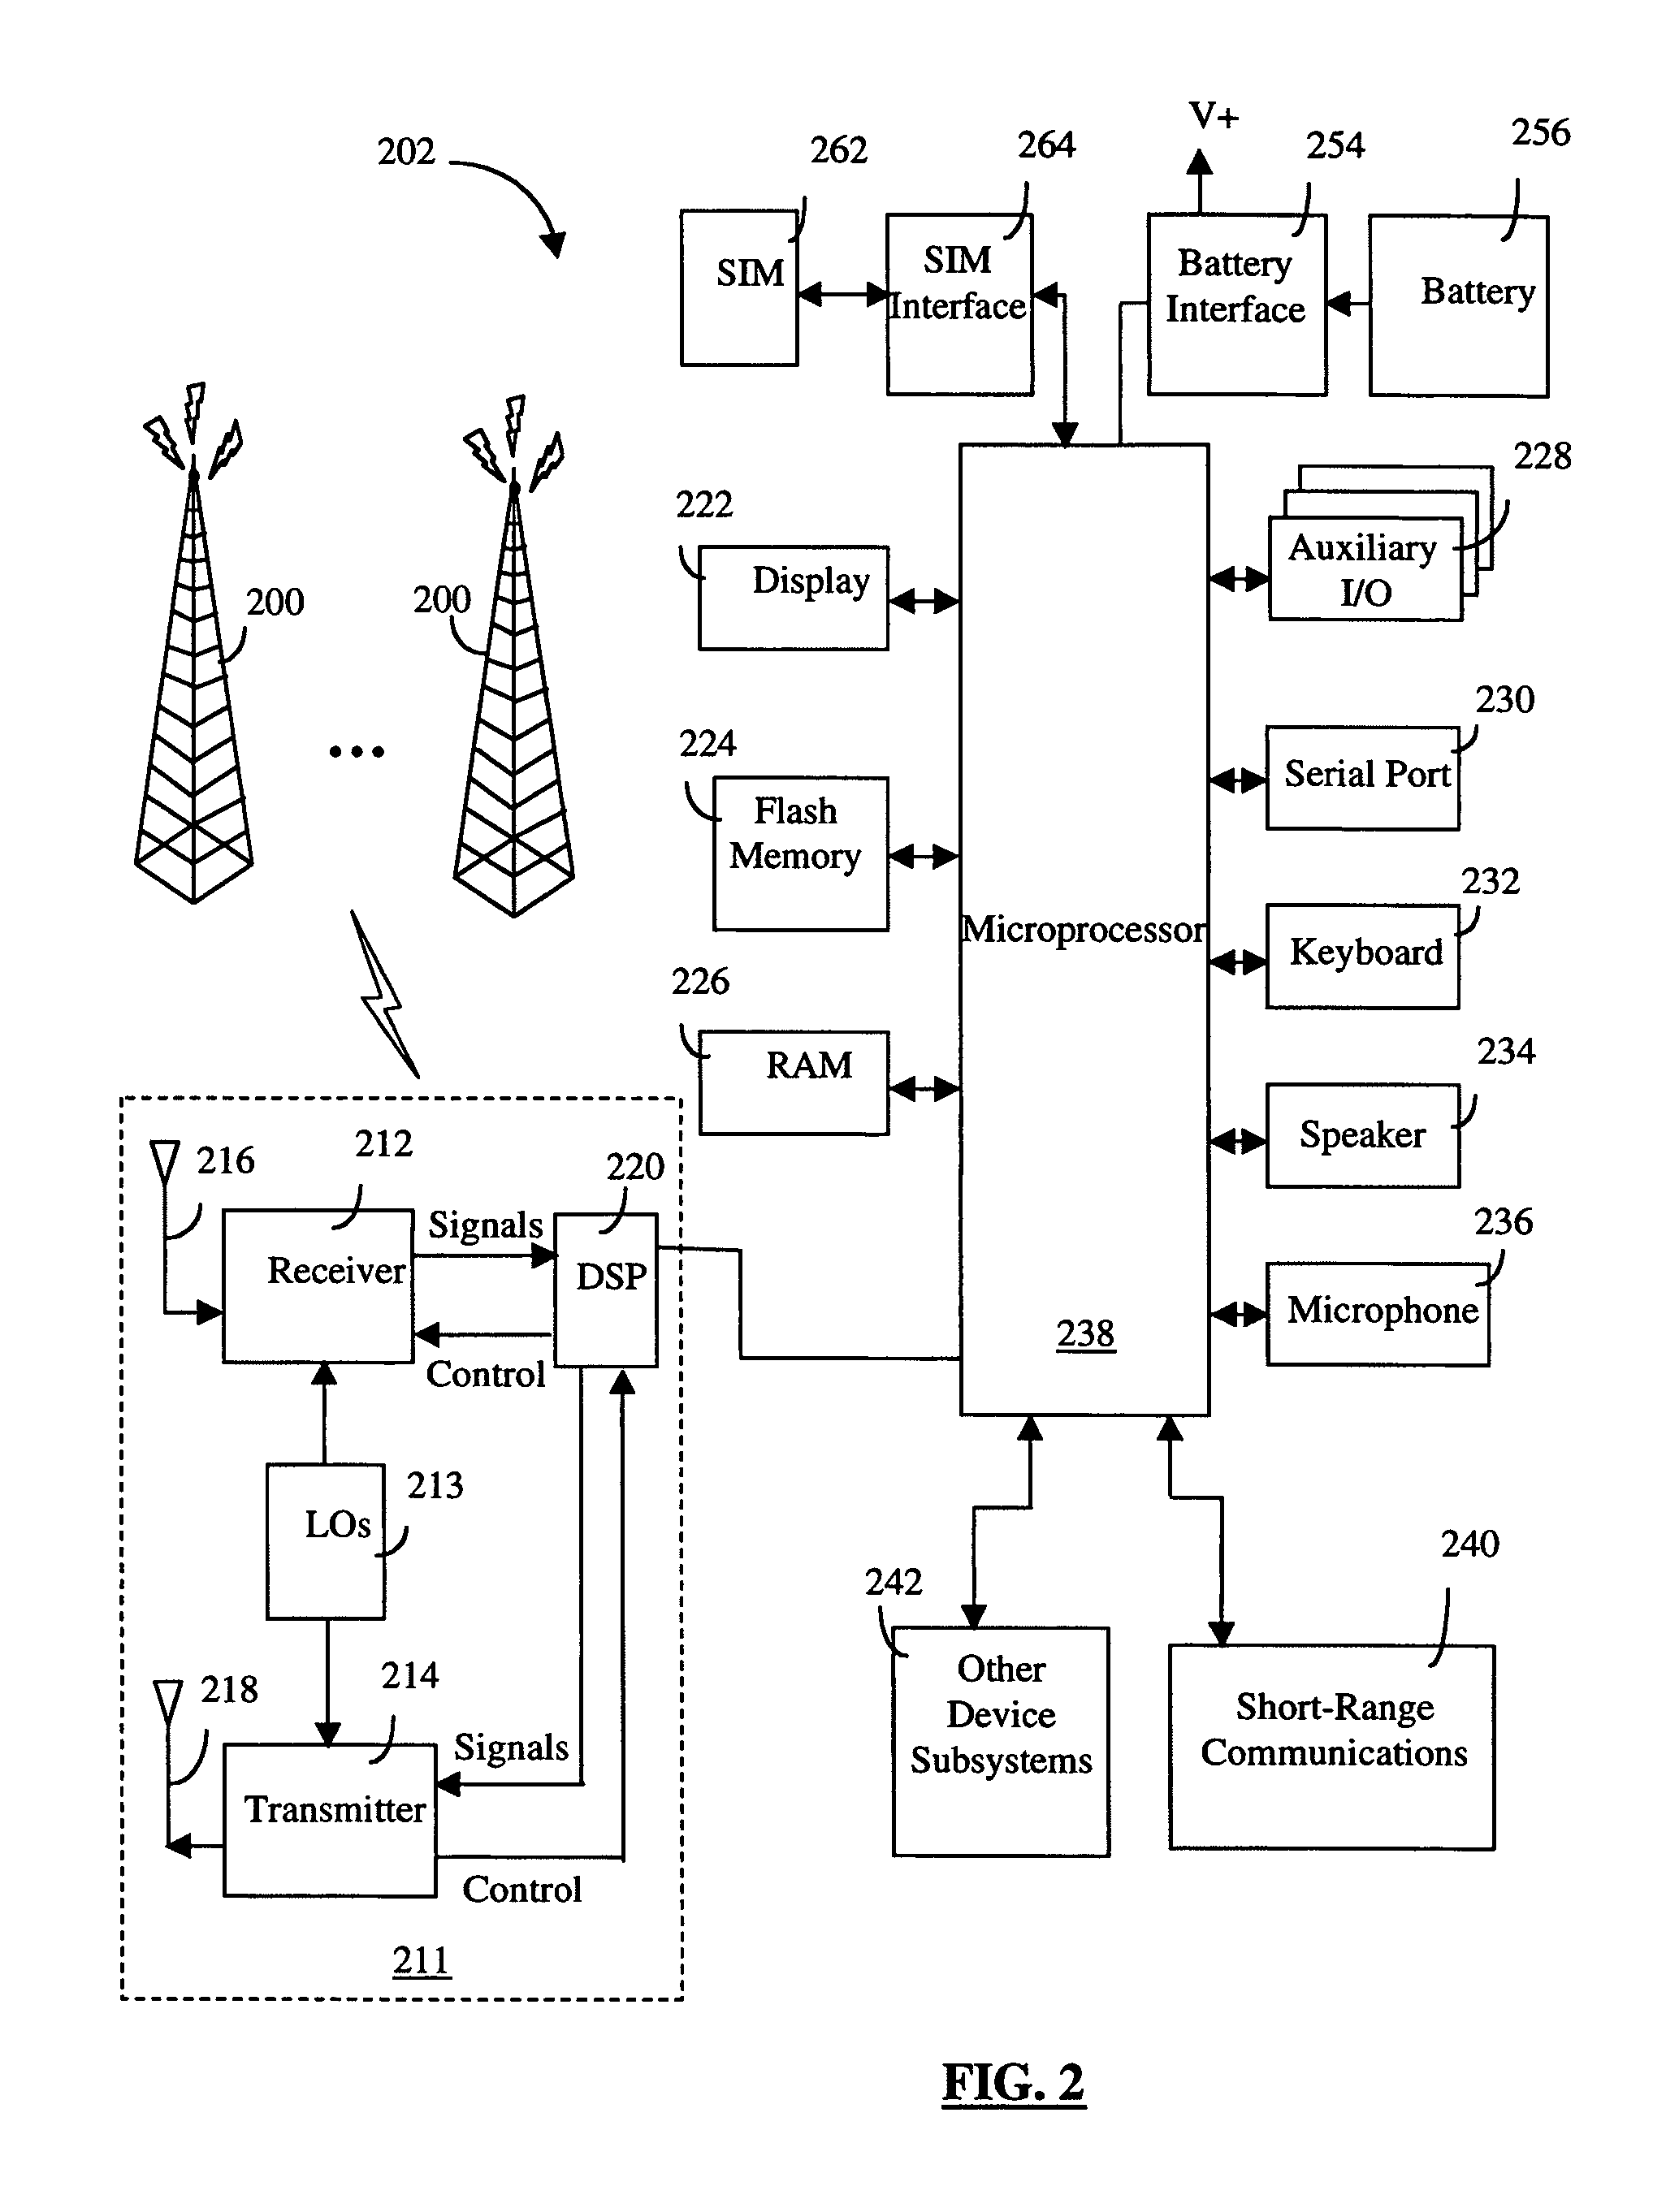 Apparatus and method for processing web service descriptions